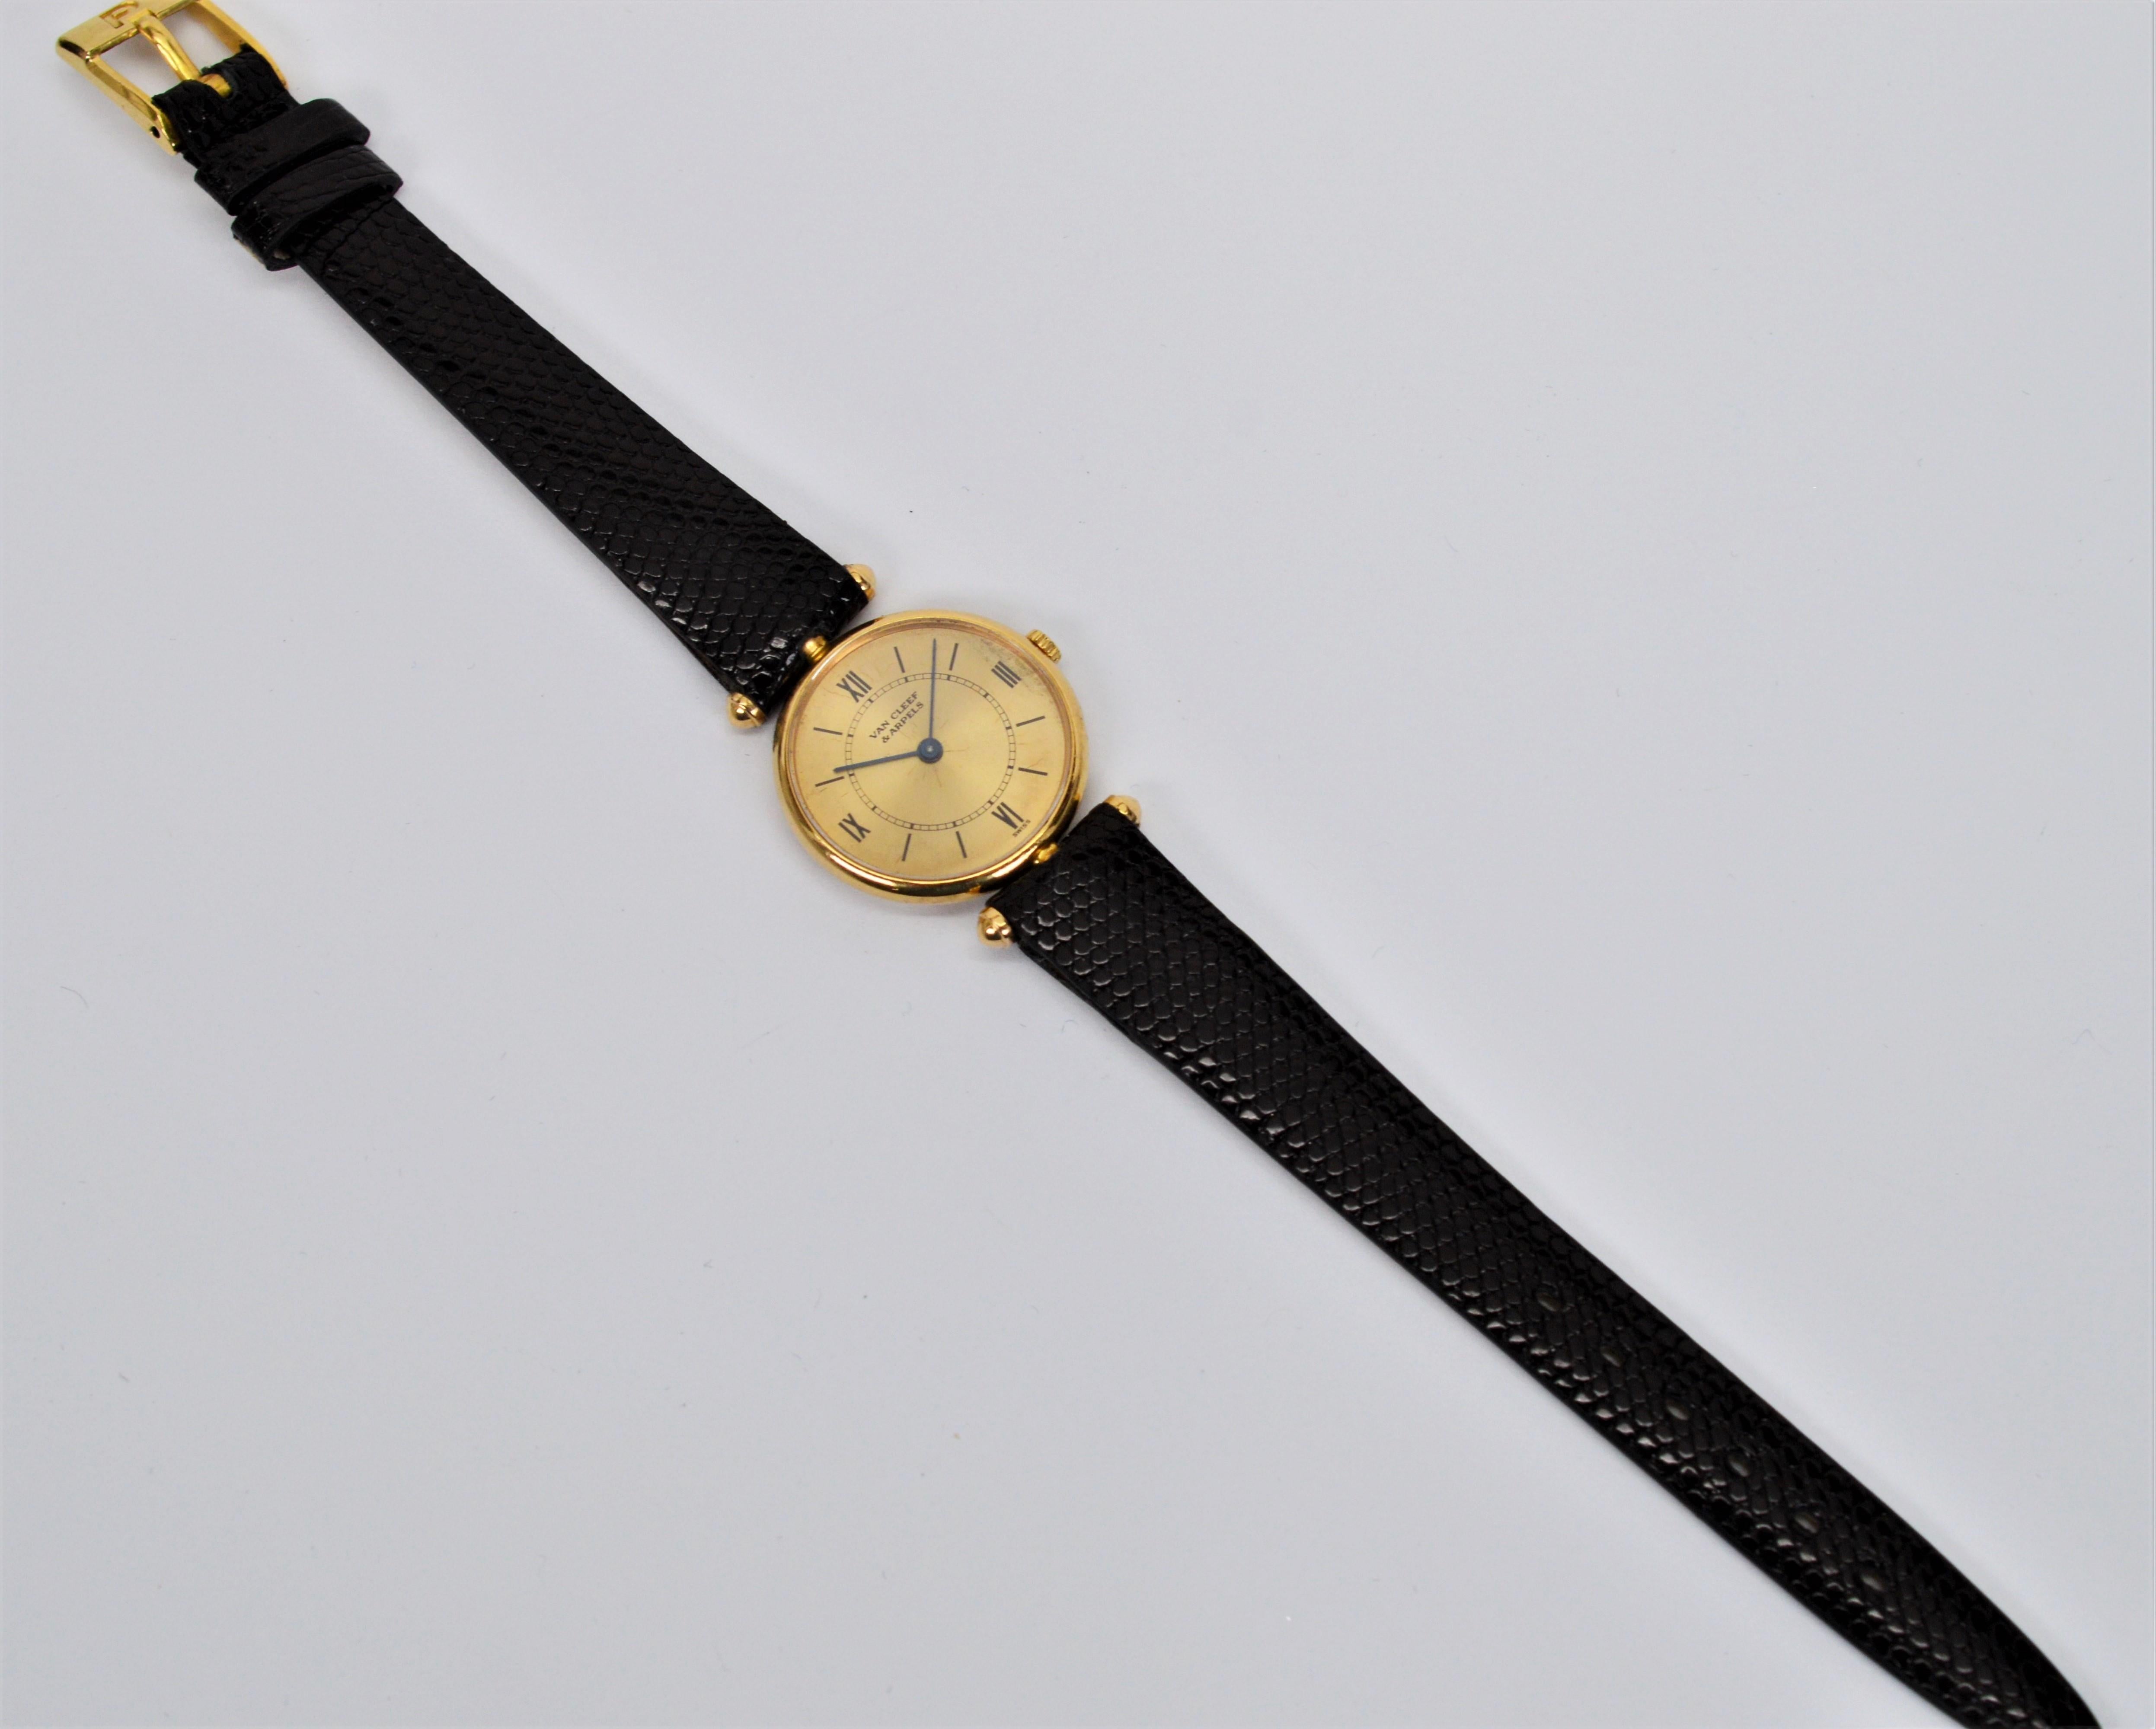 Truly stylish, this Van Cleef & Arpels Ladies Classique Wrist Watch has an attractive slender design in 18 karat yellow gold.  The original champagne dial on this Van Cleef & Arpels  wrist watch has a sapphire crystal,  Roman numerals and matchstick